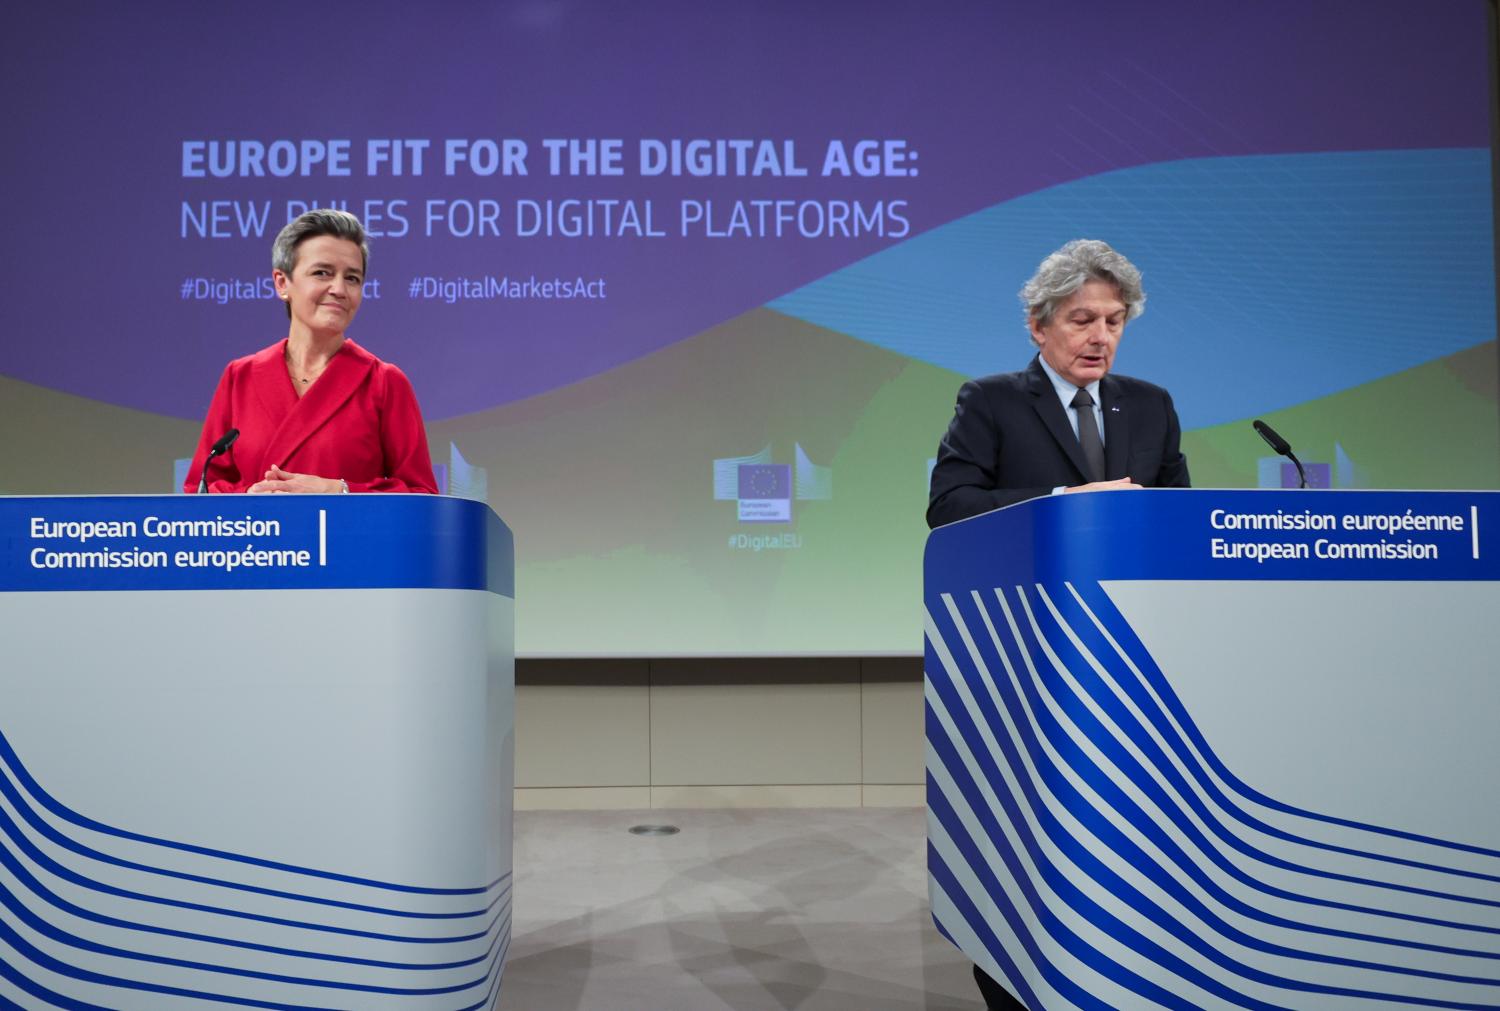 Margrethe Vestager, European Commissioner for A Europe Fit for the Digital Age and European Commissioner for Internal Market Thierry Breton, attend a news conference on the Digital Services and Digital Markets Acts